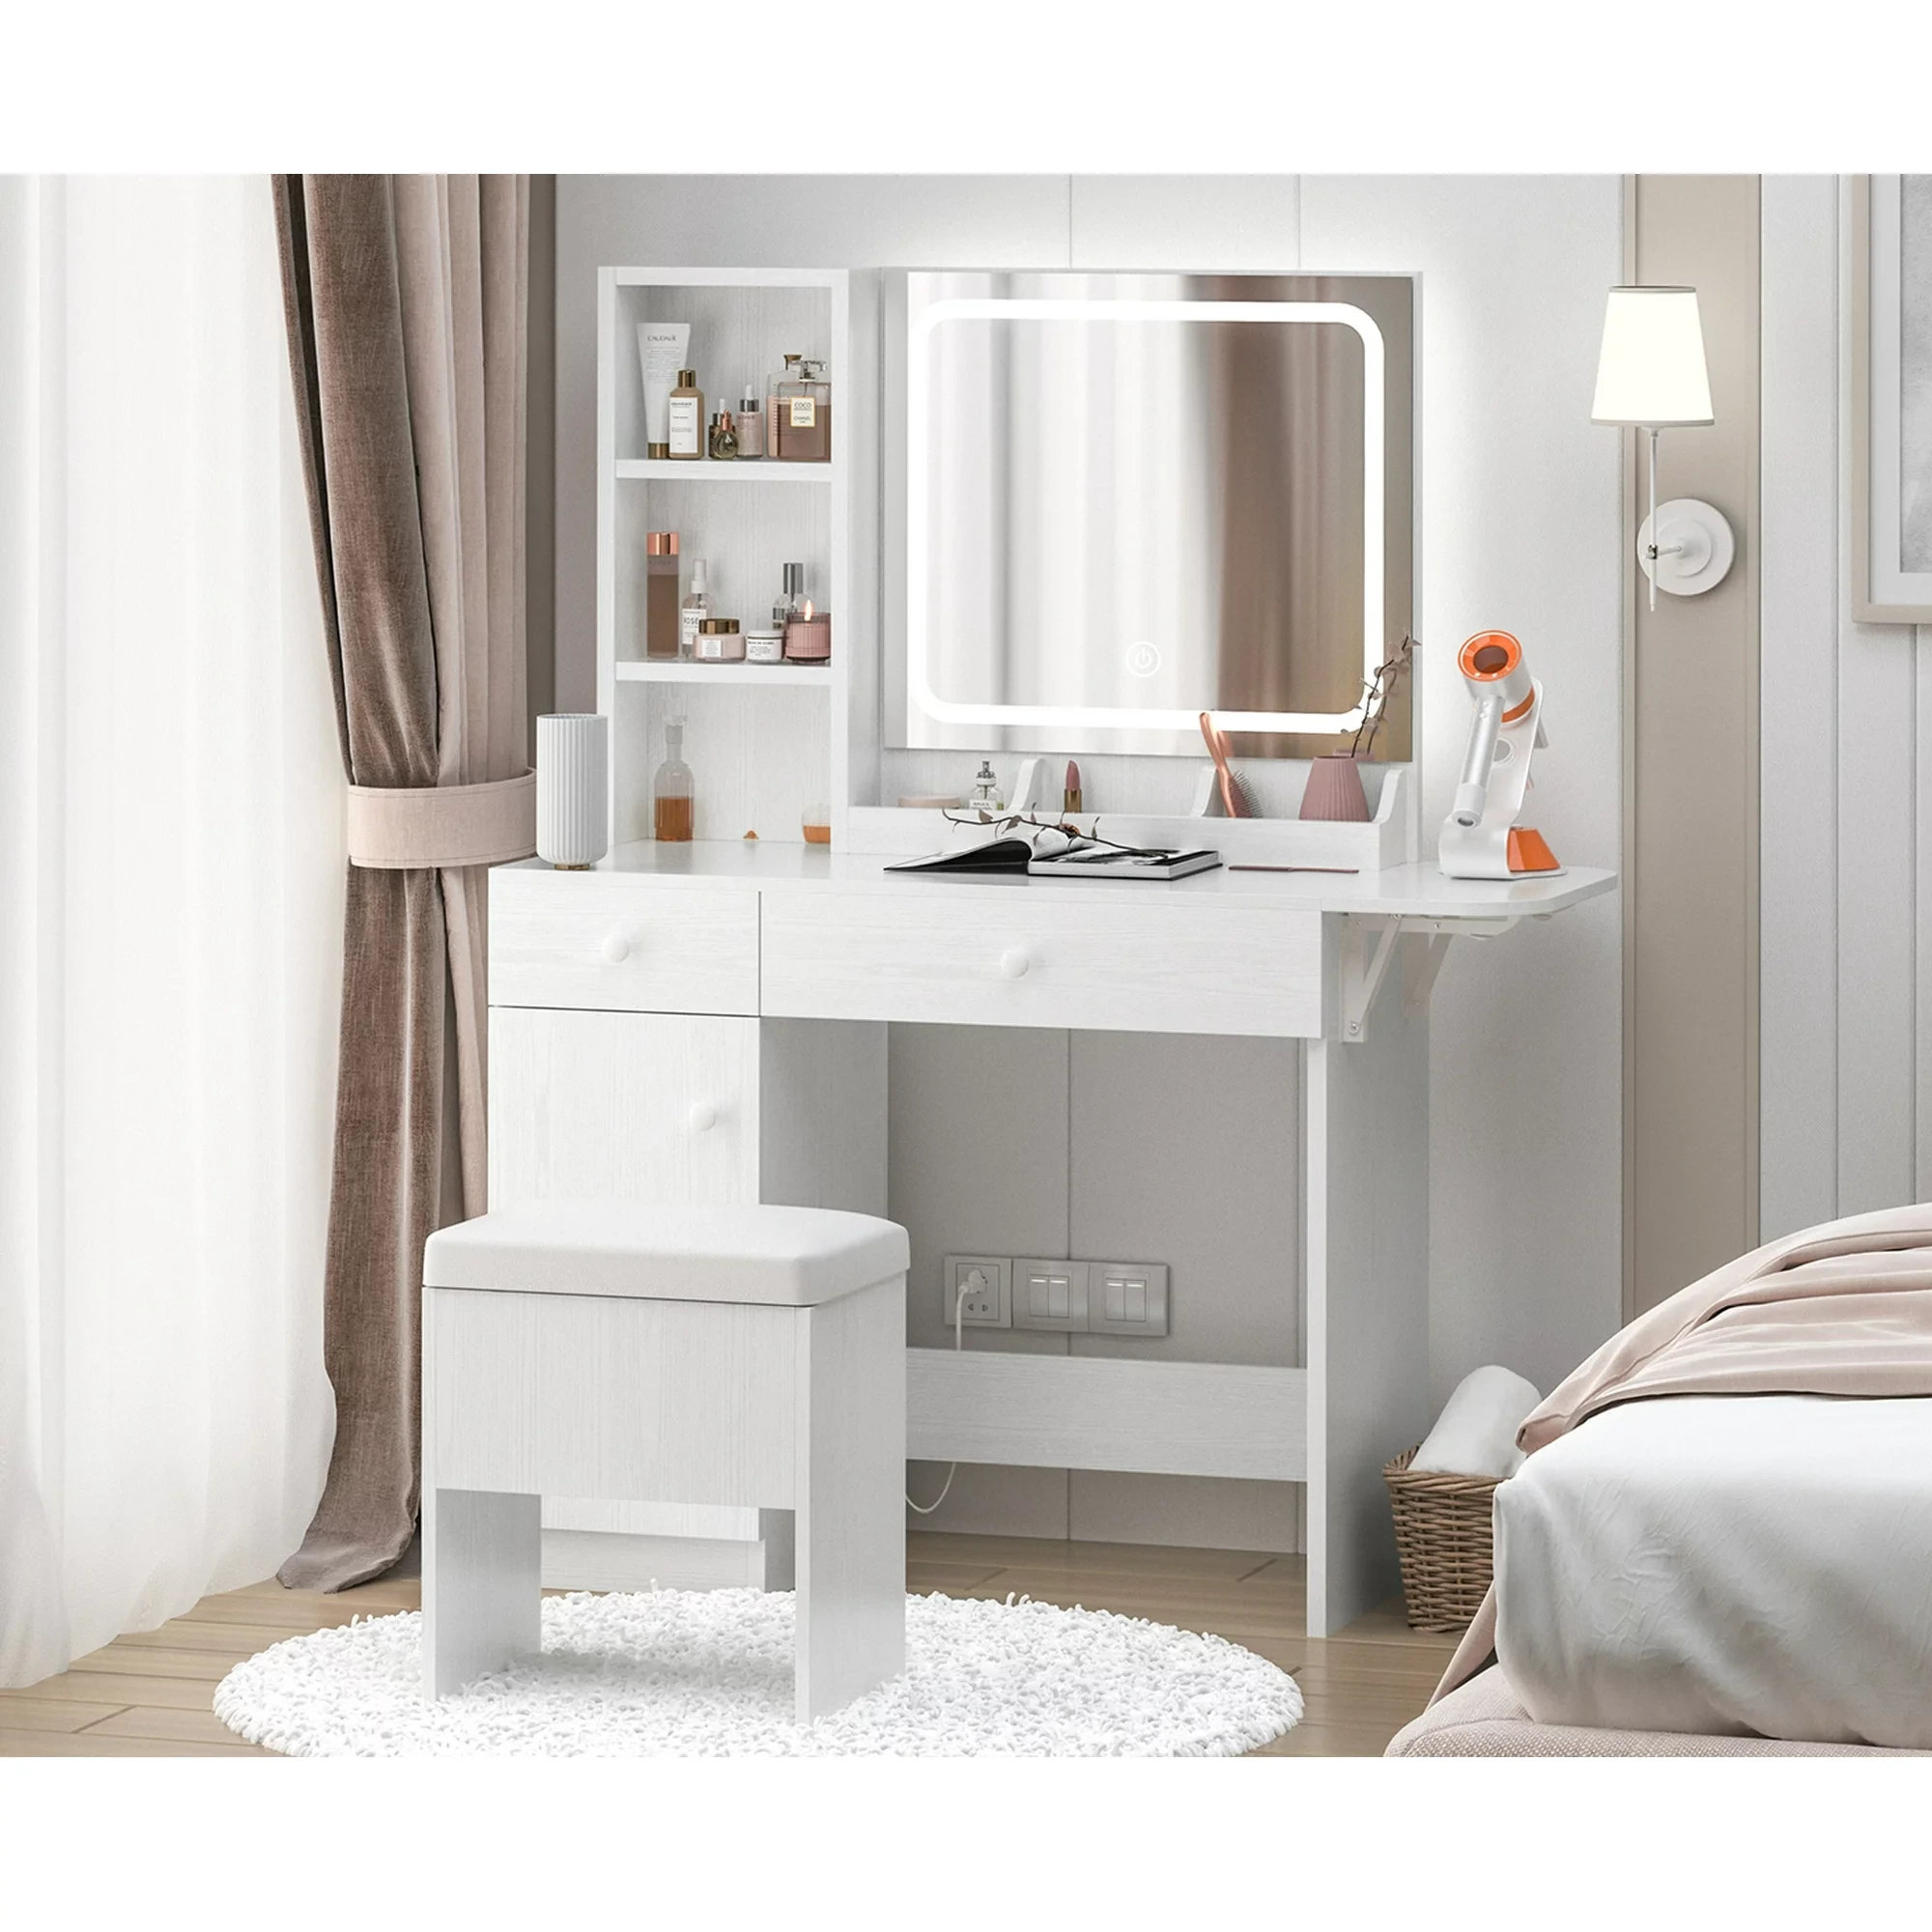 SMOOL Lighted Vanity Mirror Makeup Desk, 7 Drawers, 3 Light Modes, Power  Outlet, Stool - White